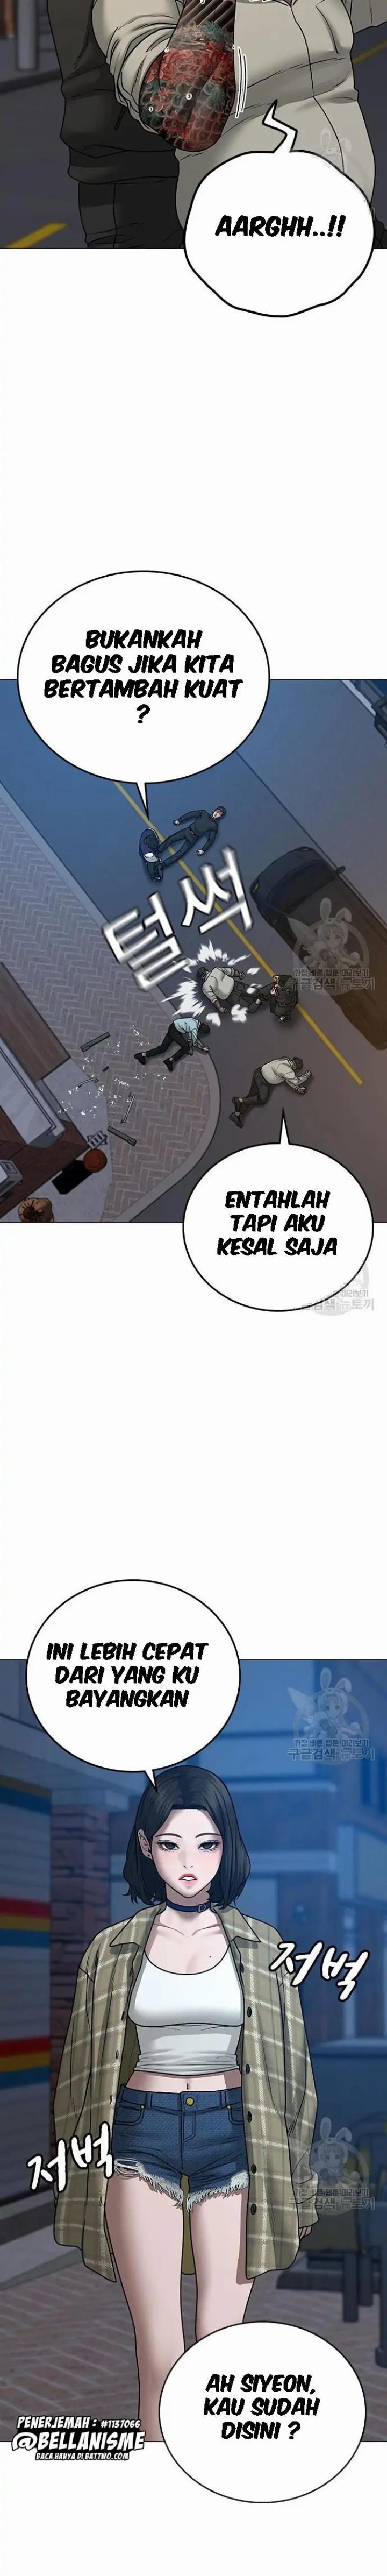 Reality Quest Chapter 55